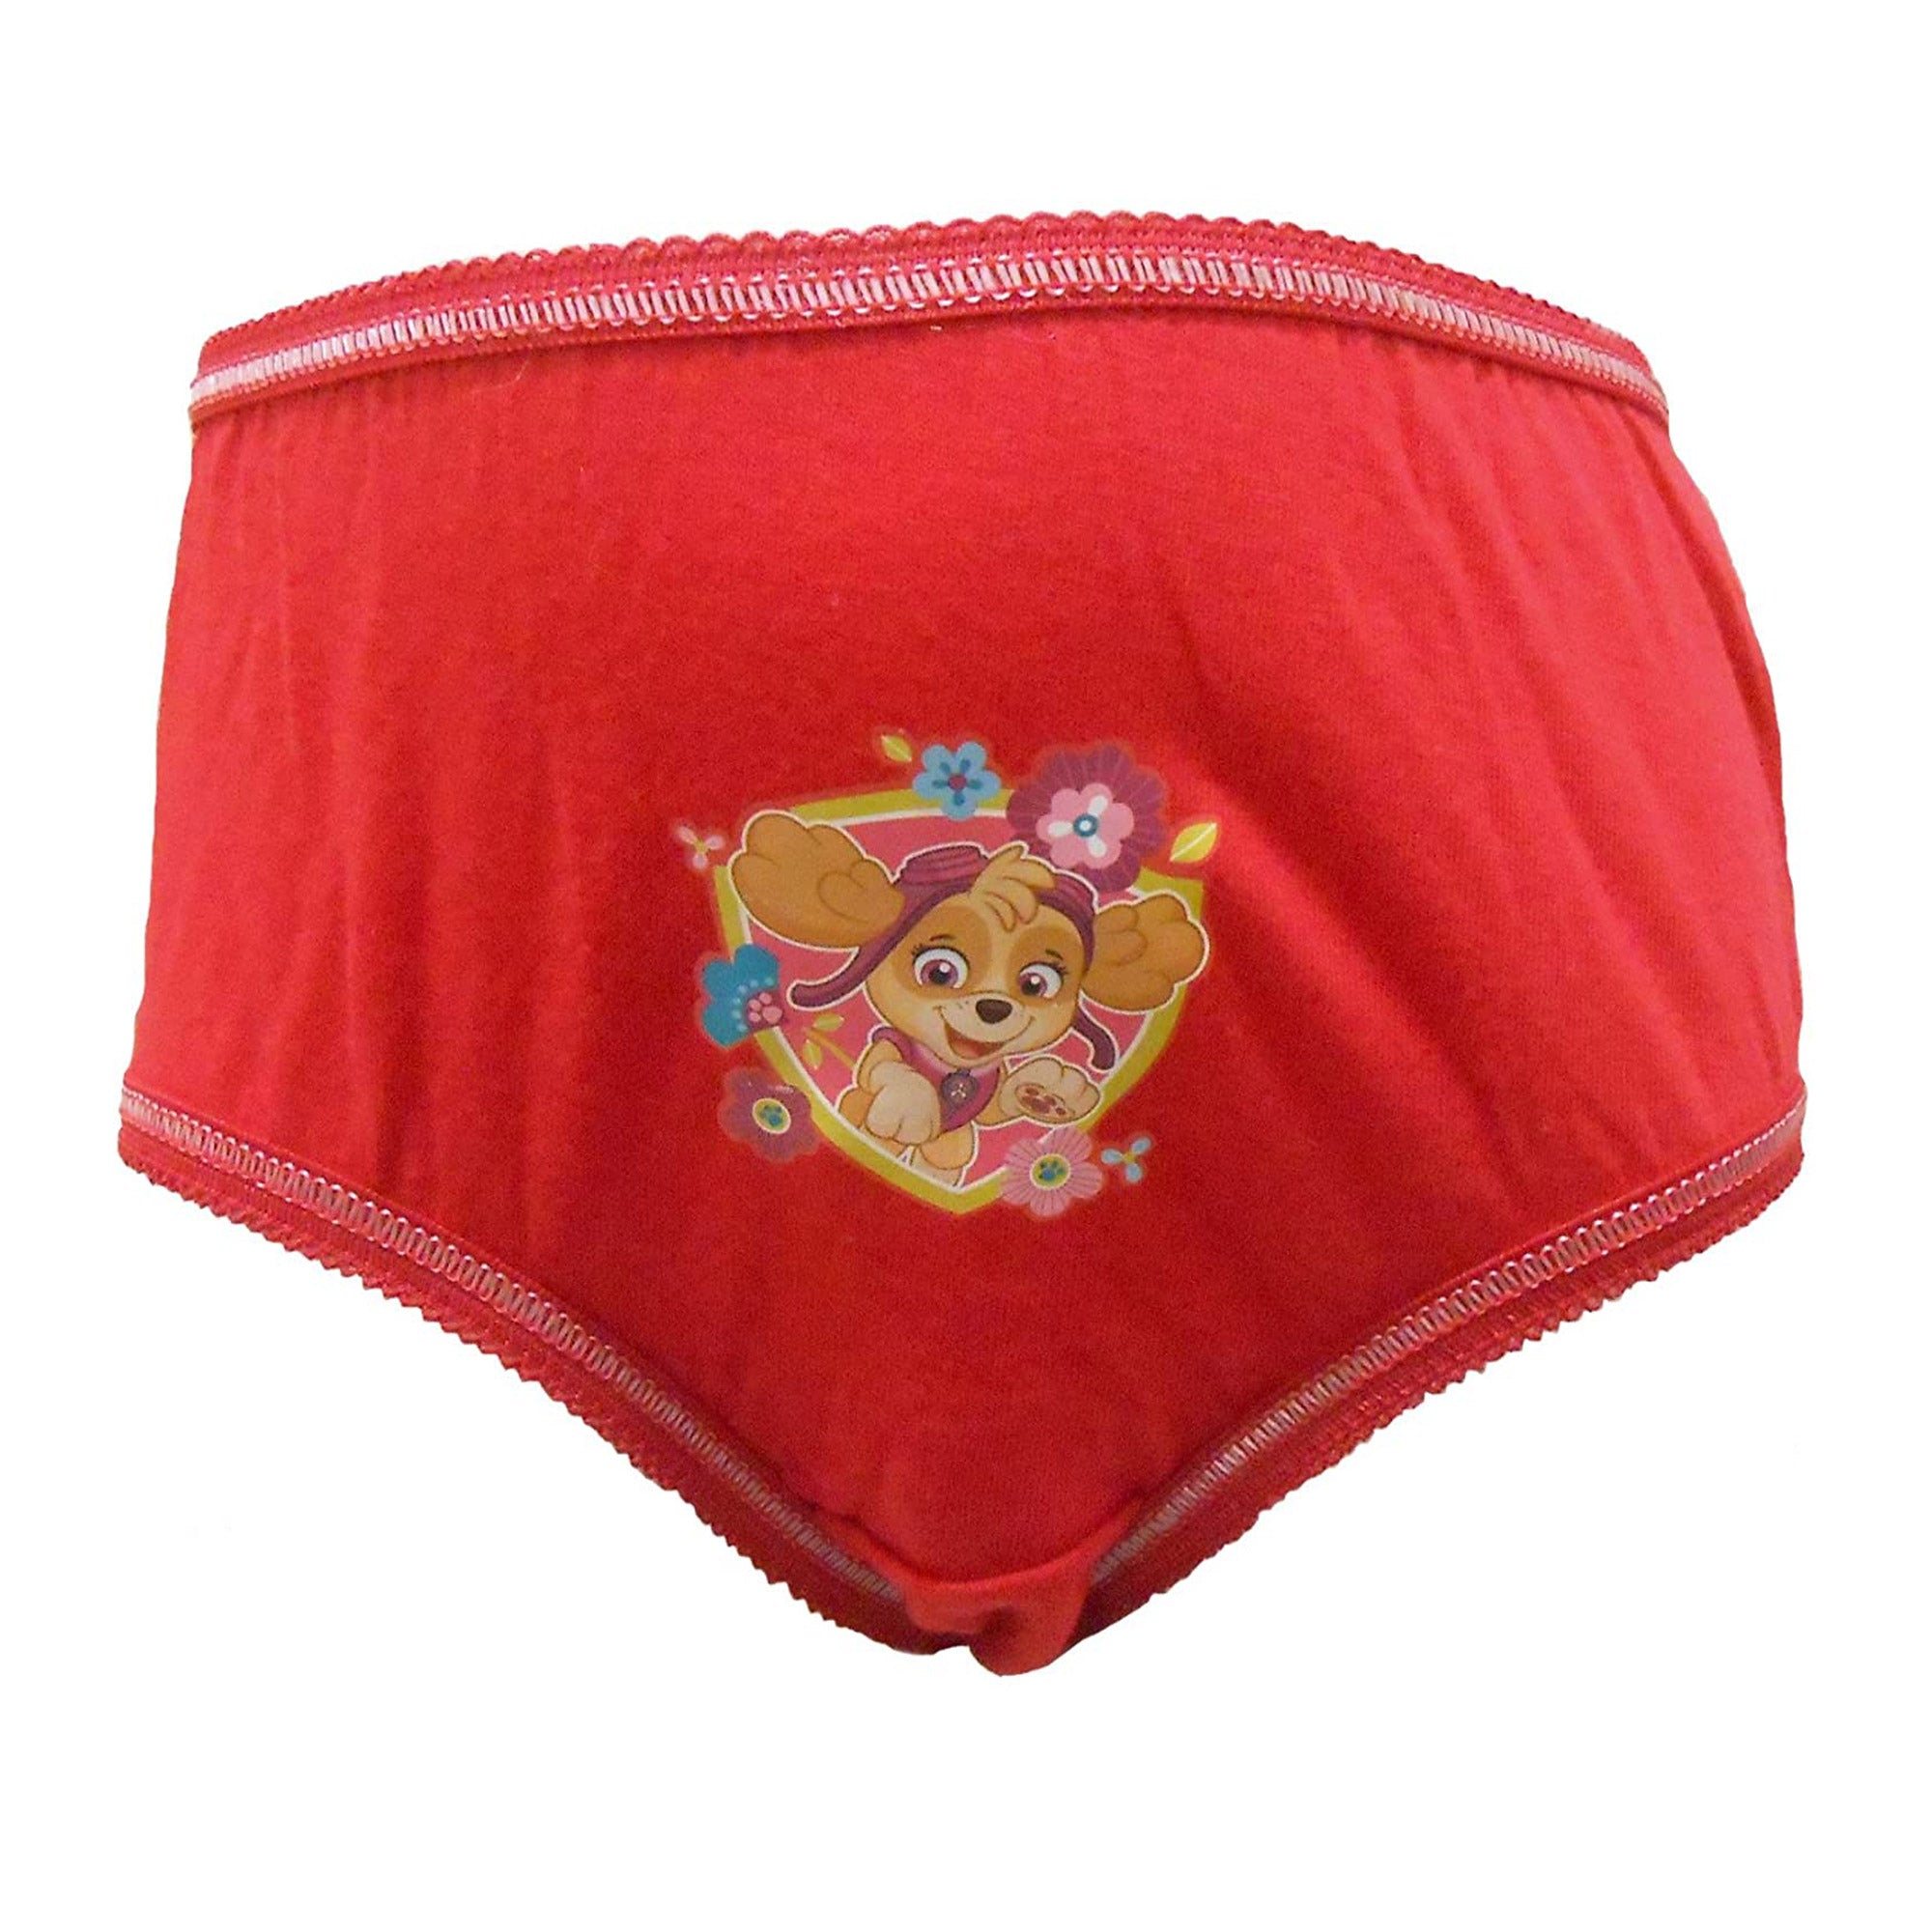 Paw Patrol Girls Knickers Red featuring Skye